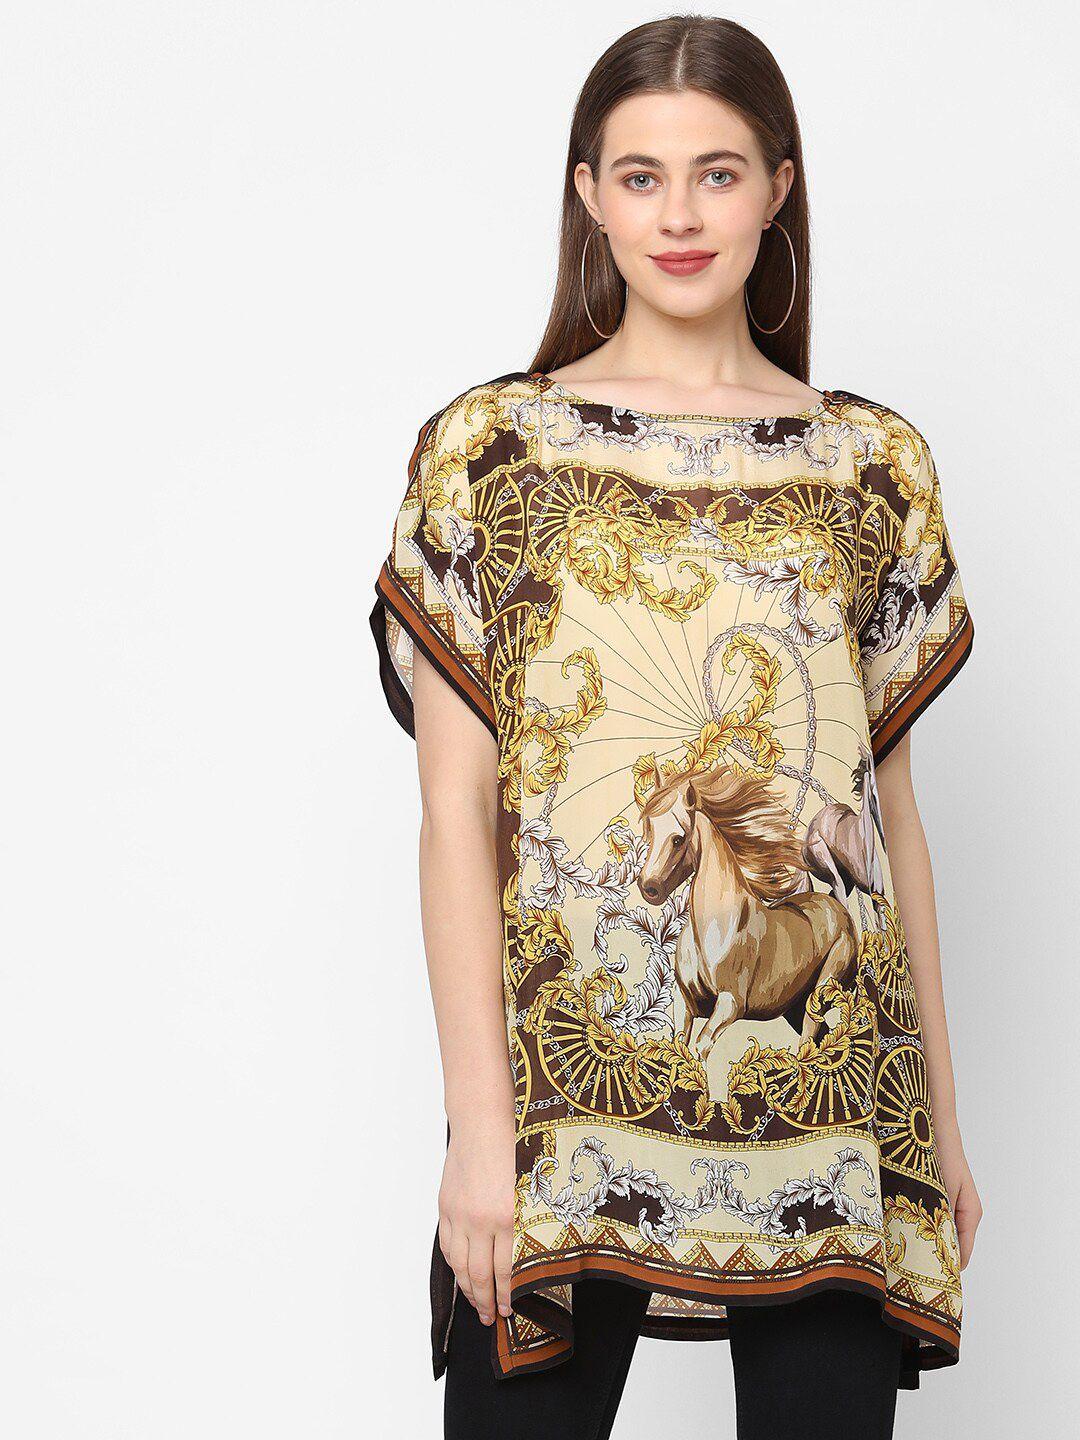 cloth haus india beige print extended sleeves chiffon top